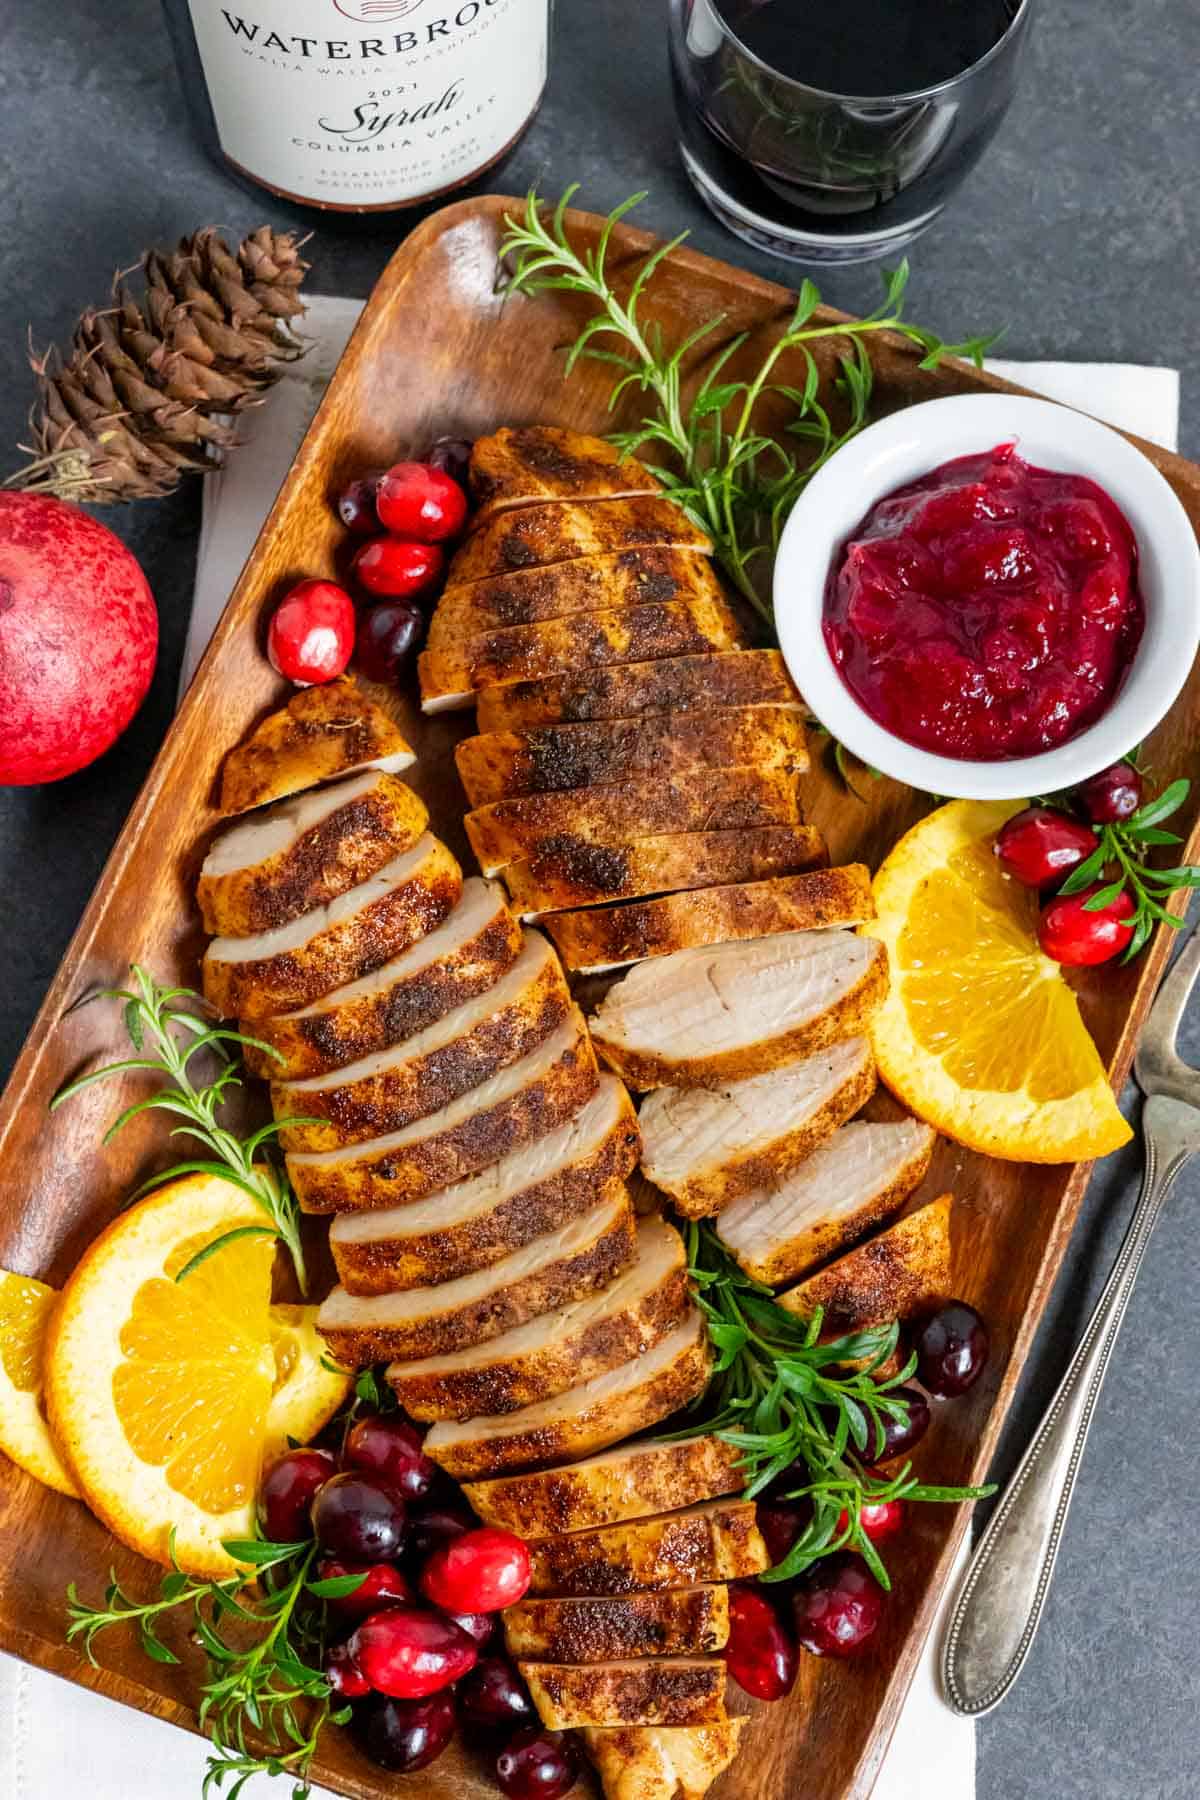 How to Make a Perfect, Juicy Air Fryer Turkey Breast